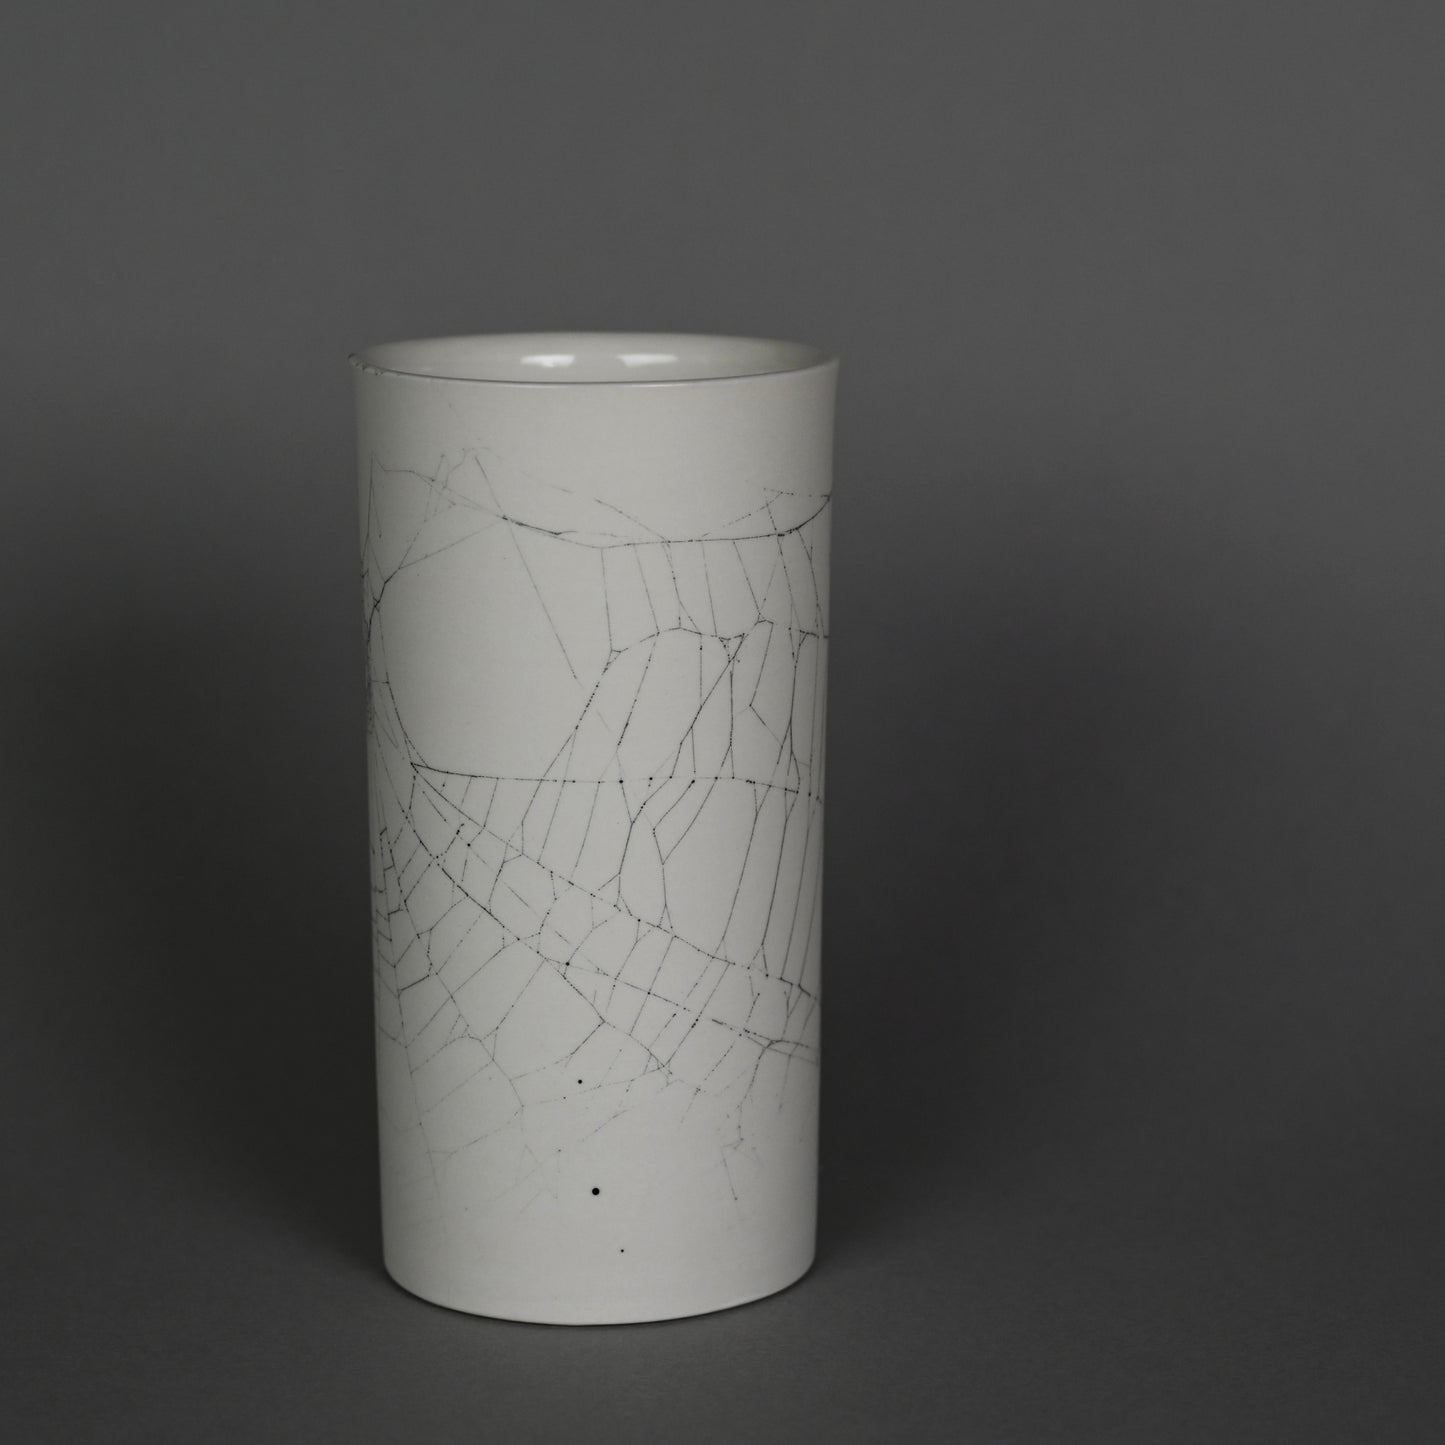 Web on Clay (191), Collected September 19, 2022